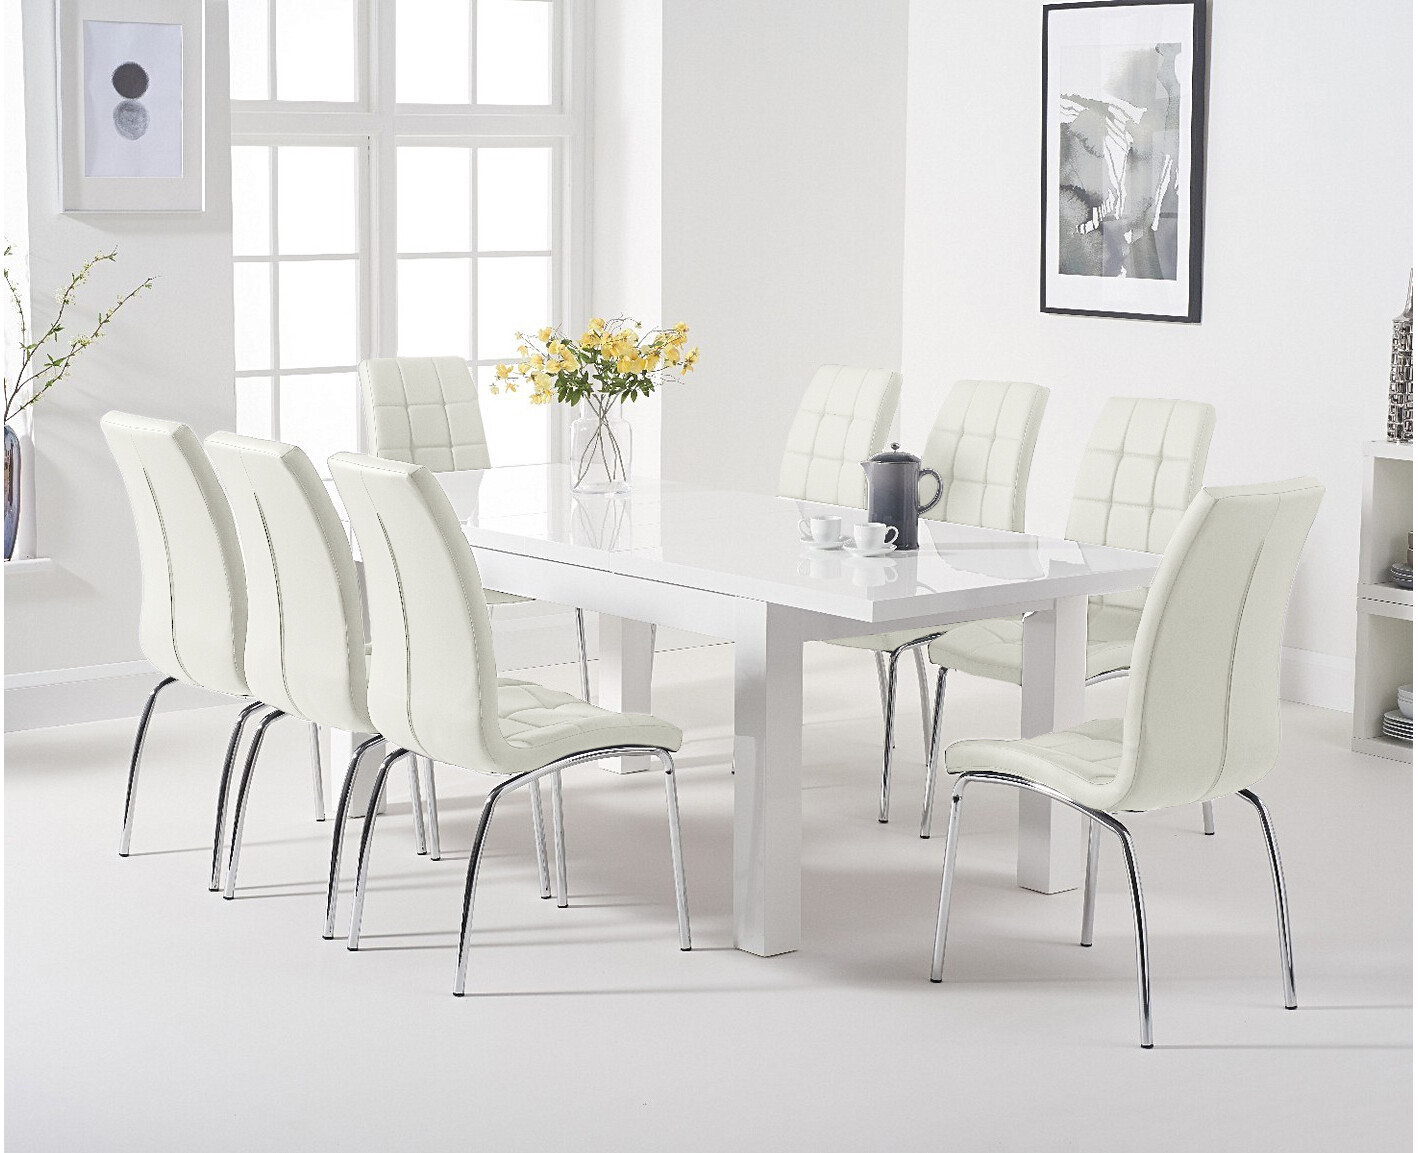 Extending Atlanta 160cm White High Gloss Dining Table With 4 Cream Enzo Chairs